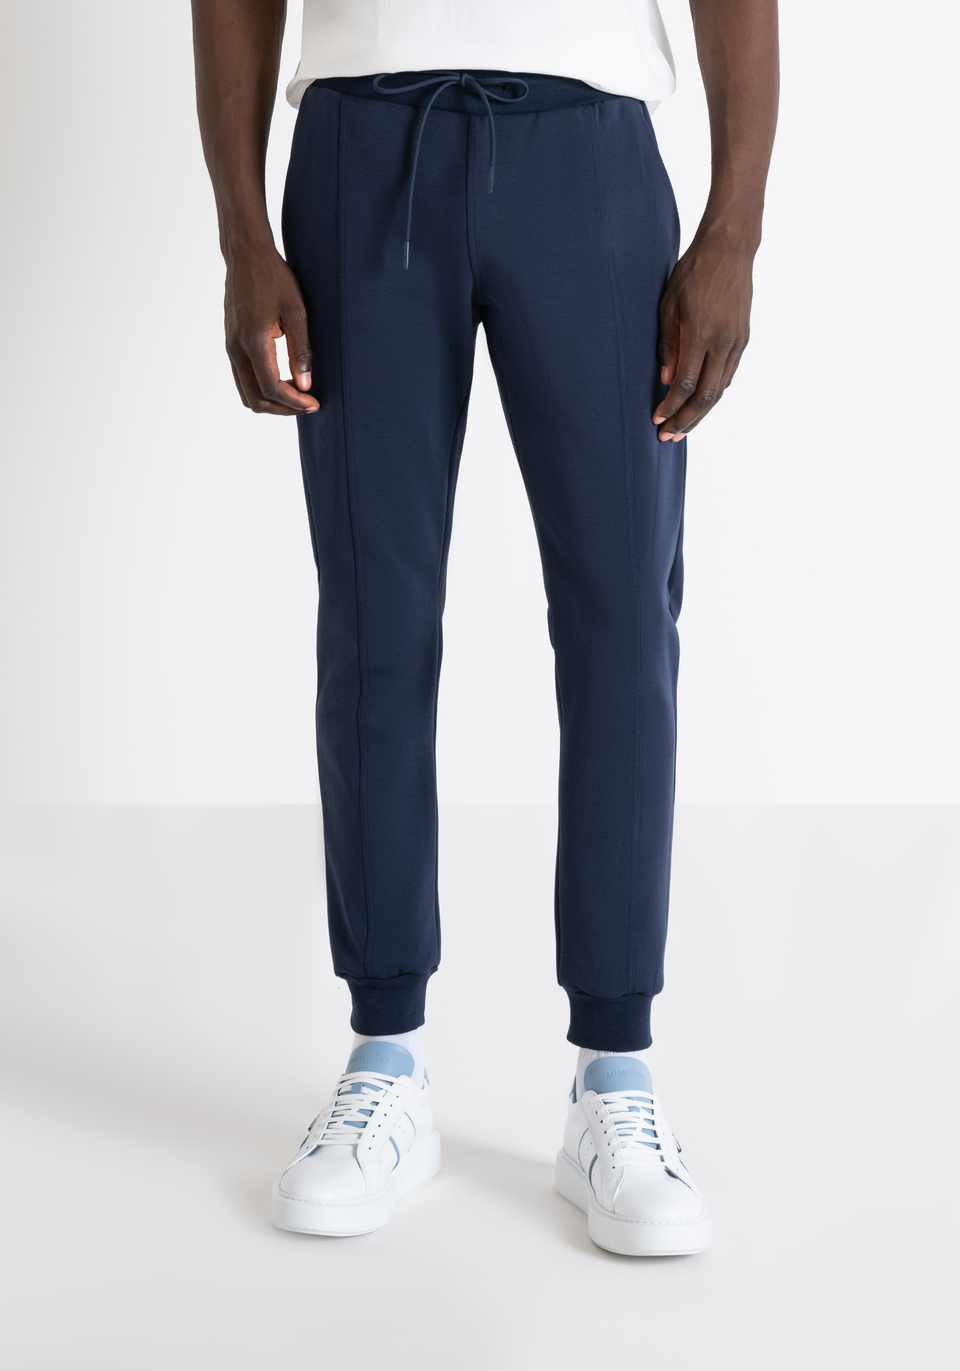 SLIM FIT SWEATPANTS IN COTTON BLEND WITH LOGO PATCH ON THE BACK - Antony Morato Online Shop